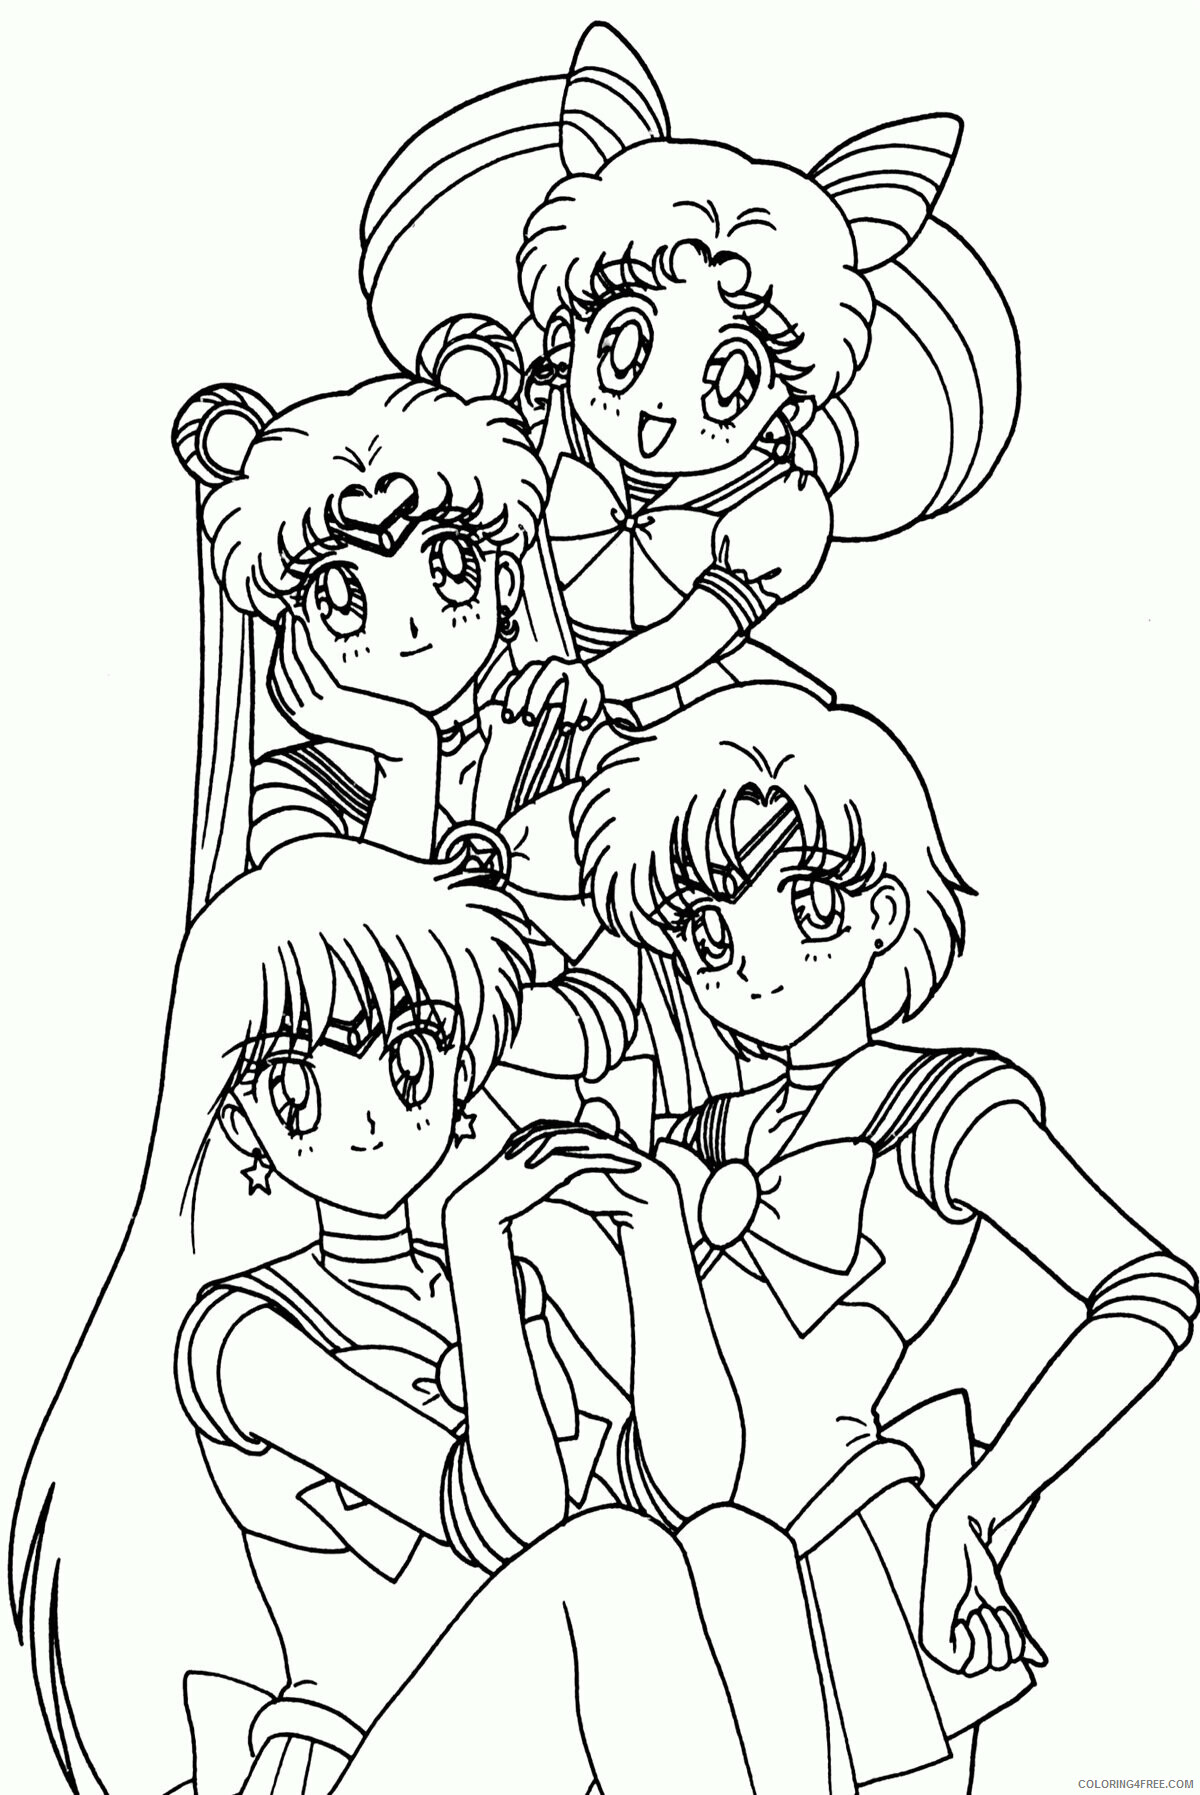 Anime Girls Group Coloring Page Printable Sheets 9 Pics of Anime Group 2021 a 1387 Coloring4free